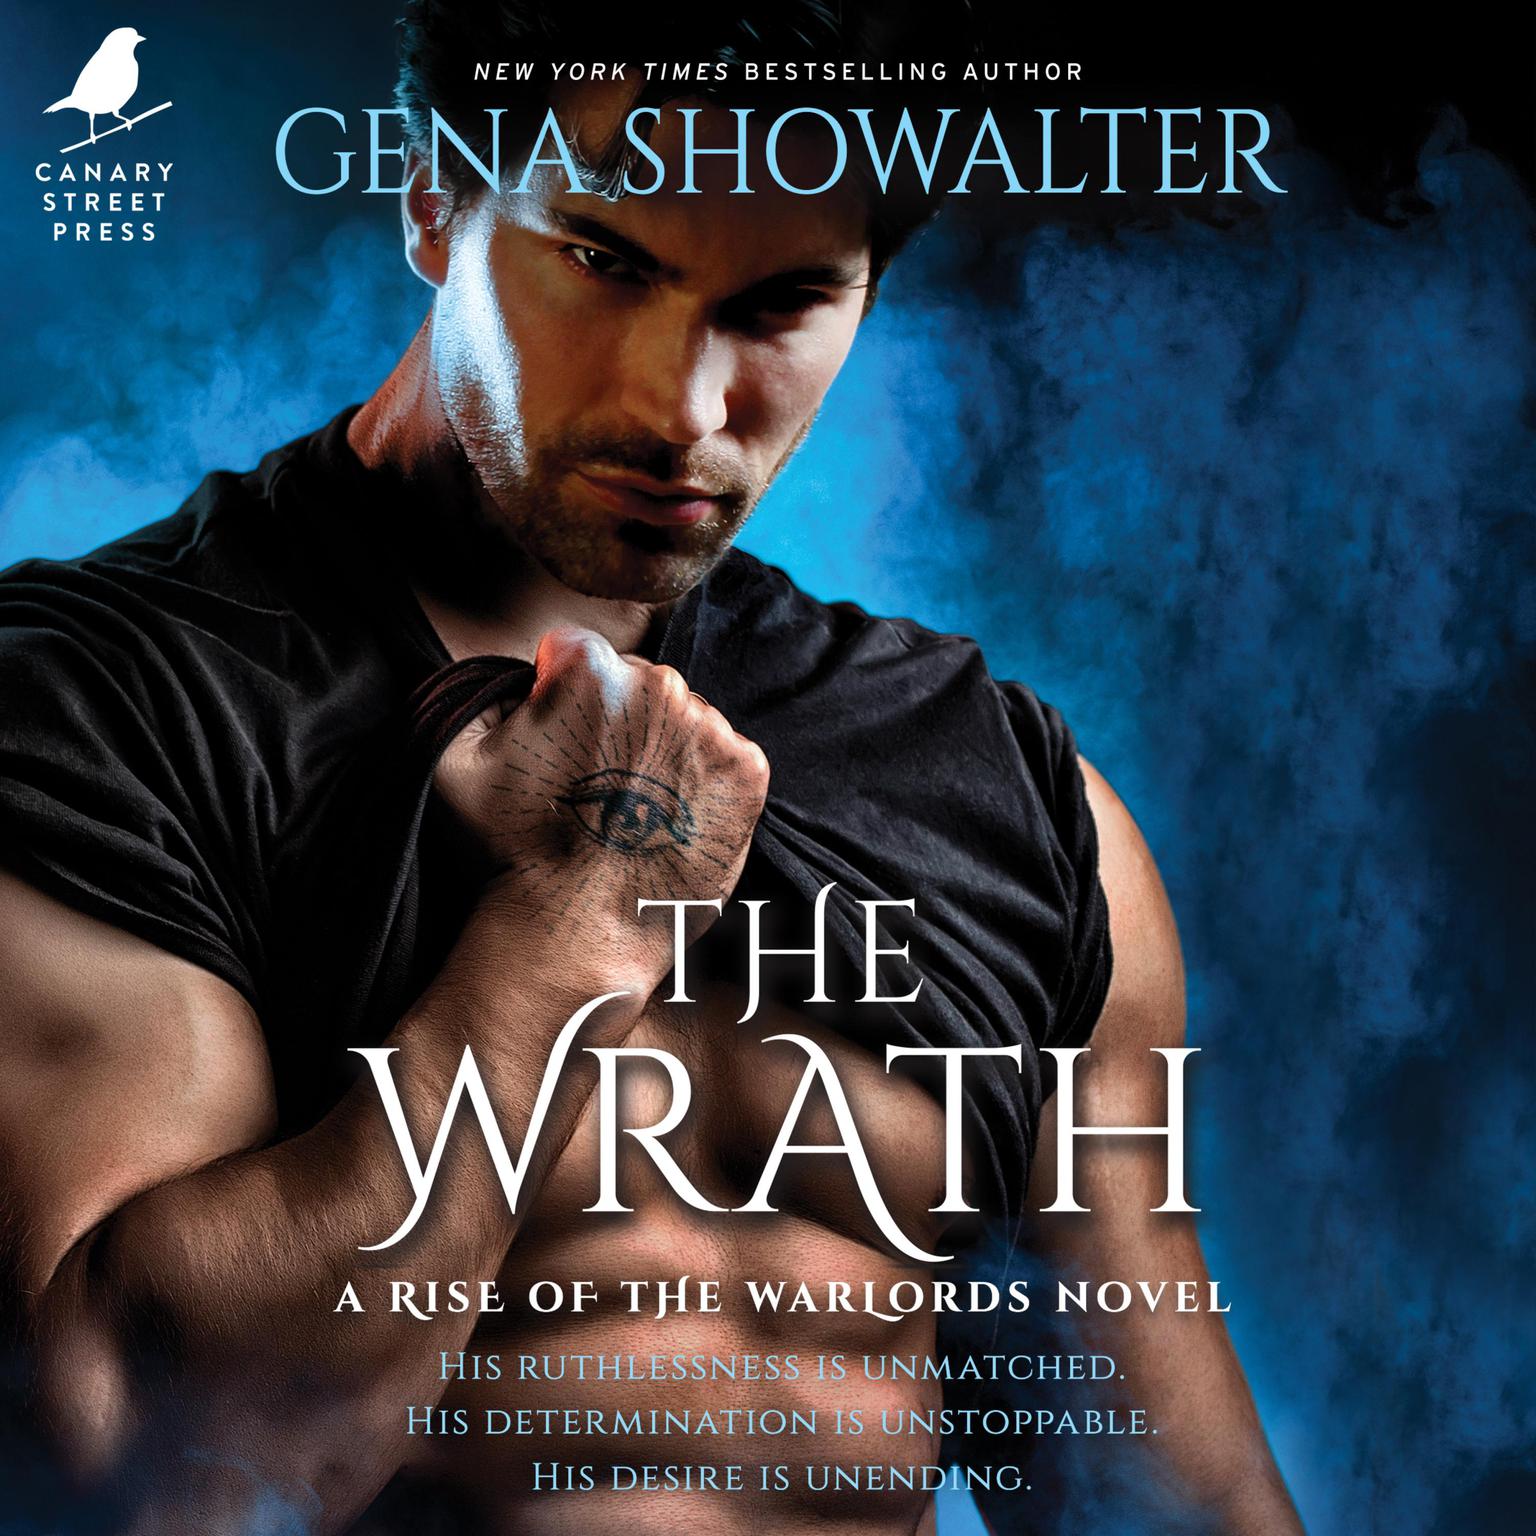 The Wrath Audiobook, by Gena Showalter